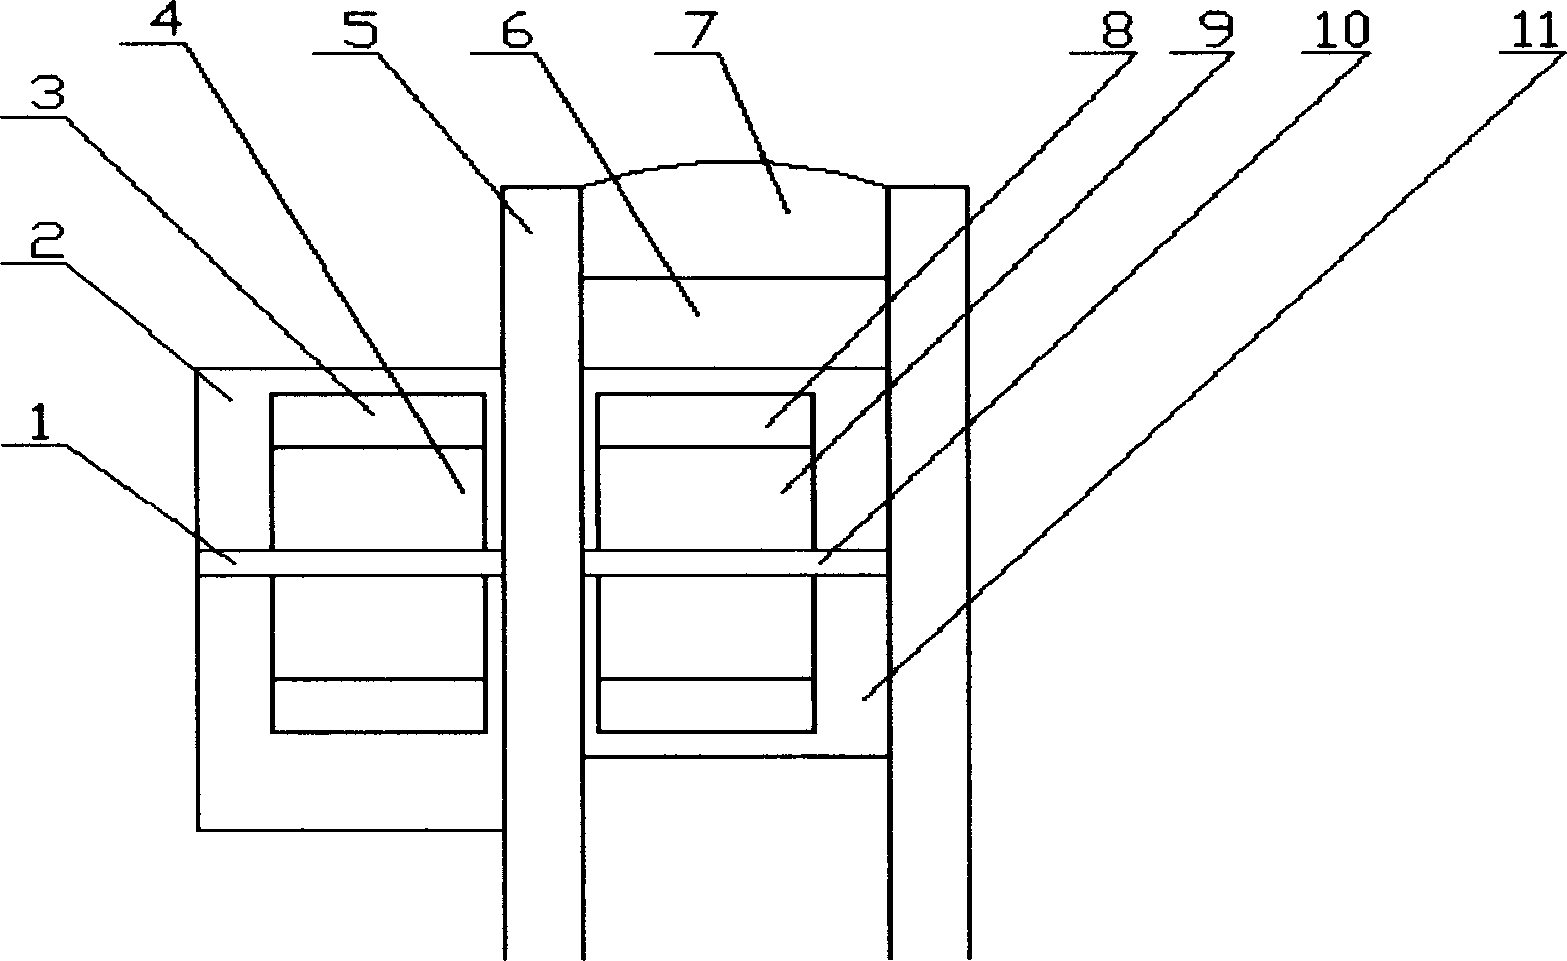 Internally-installed shutter rotation magnetic control device